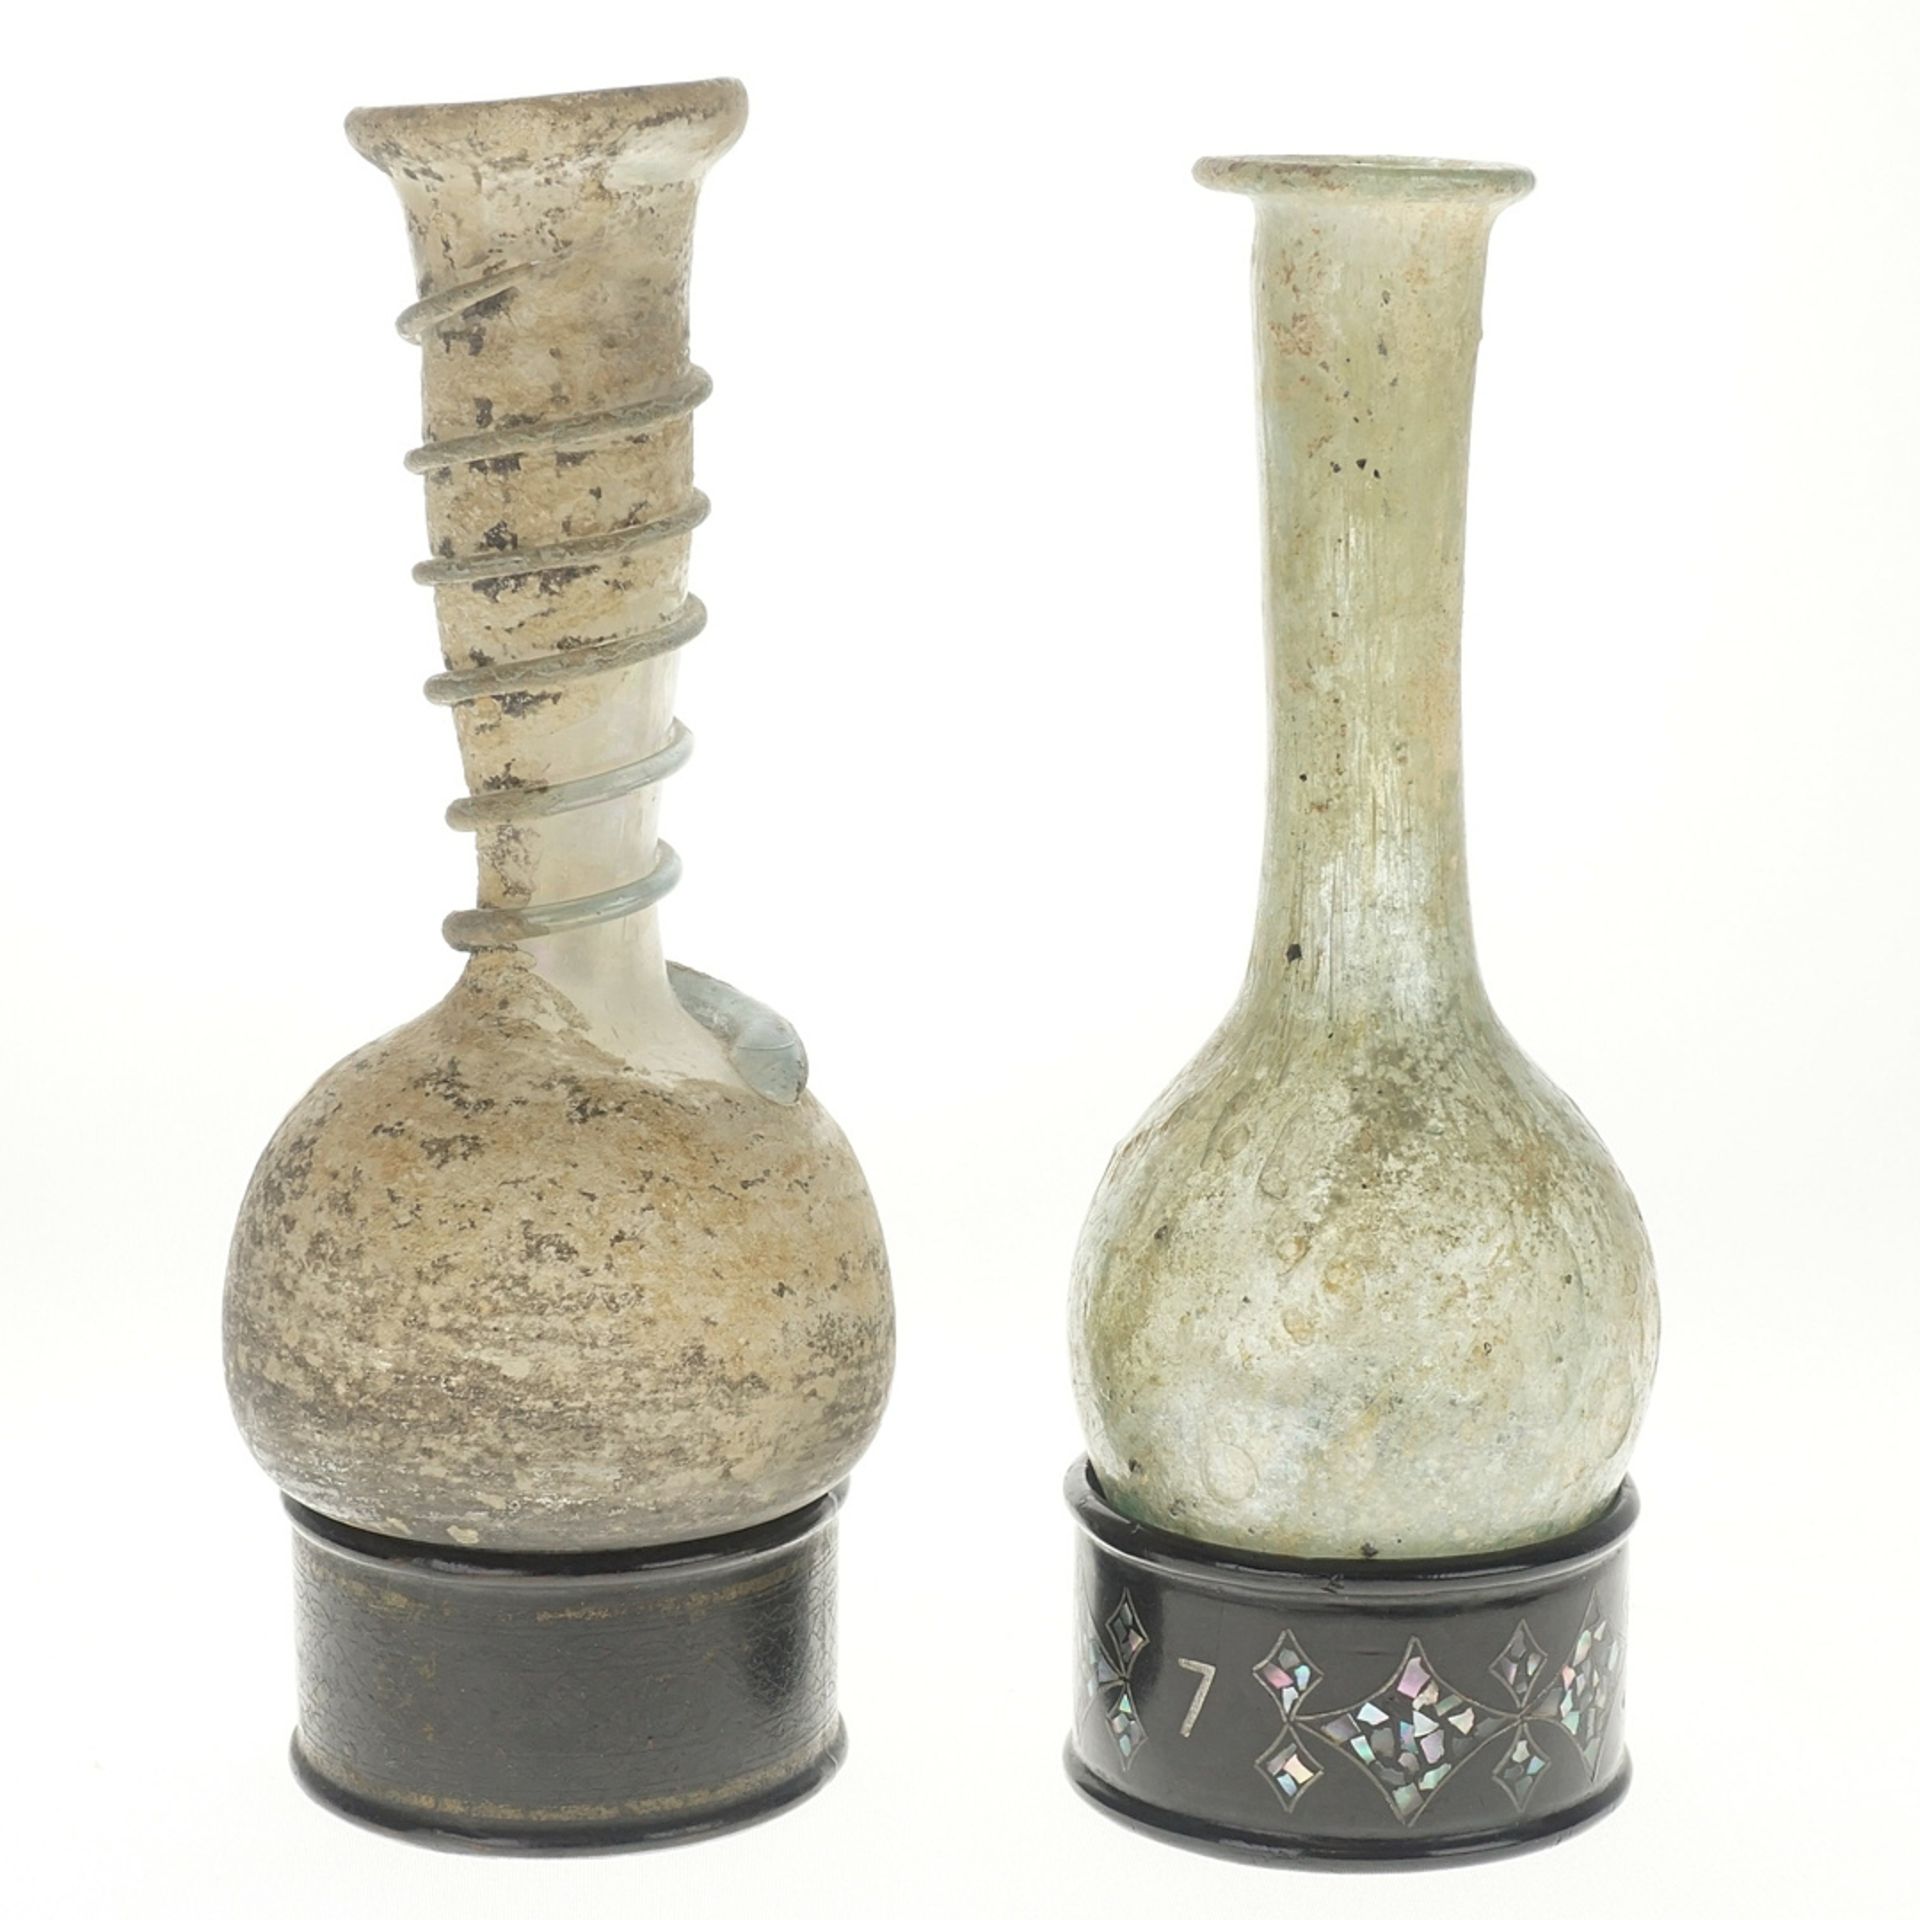 Two small glass bottles based on models from Roman antiquity